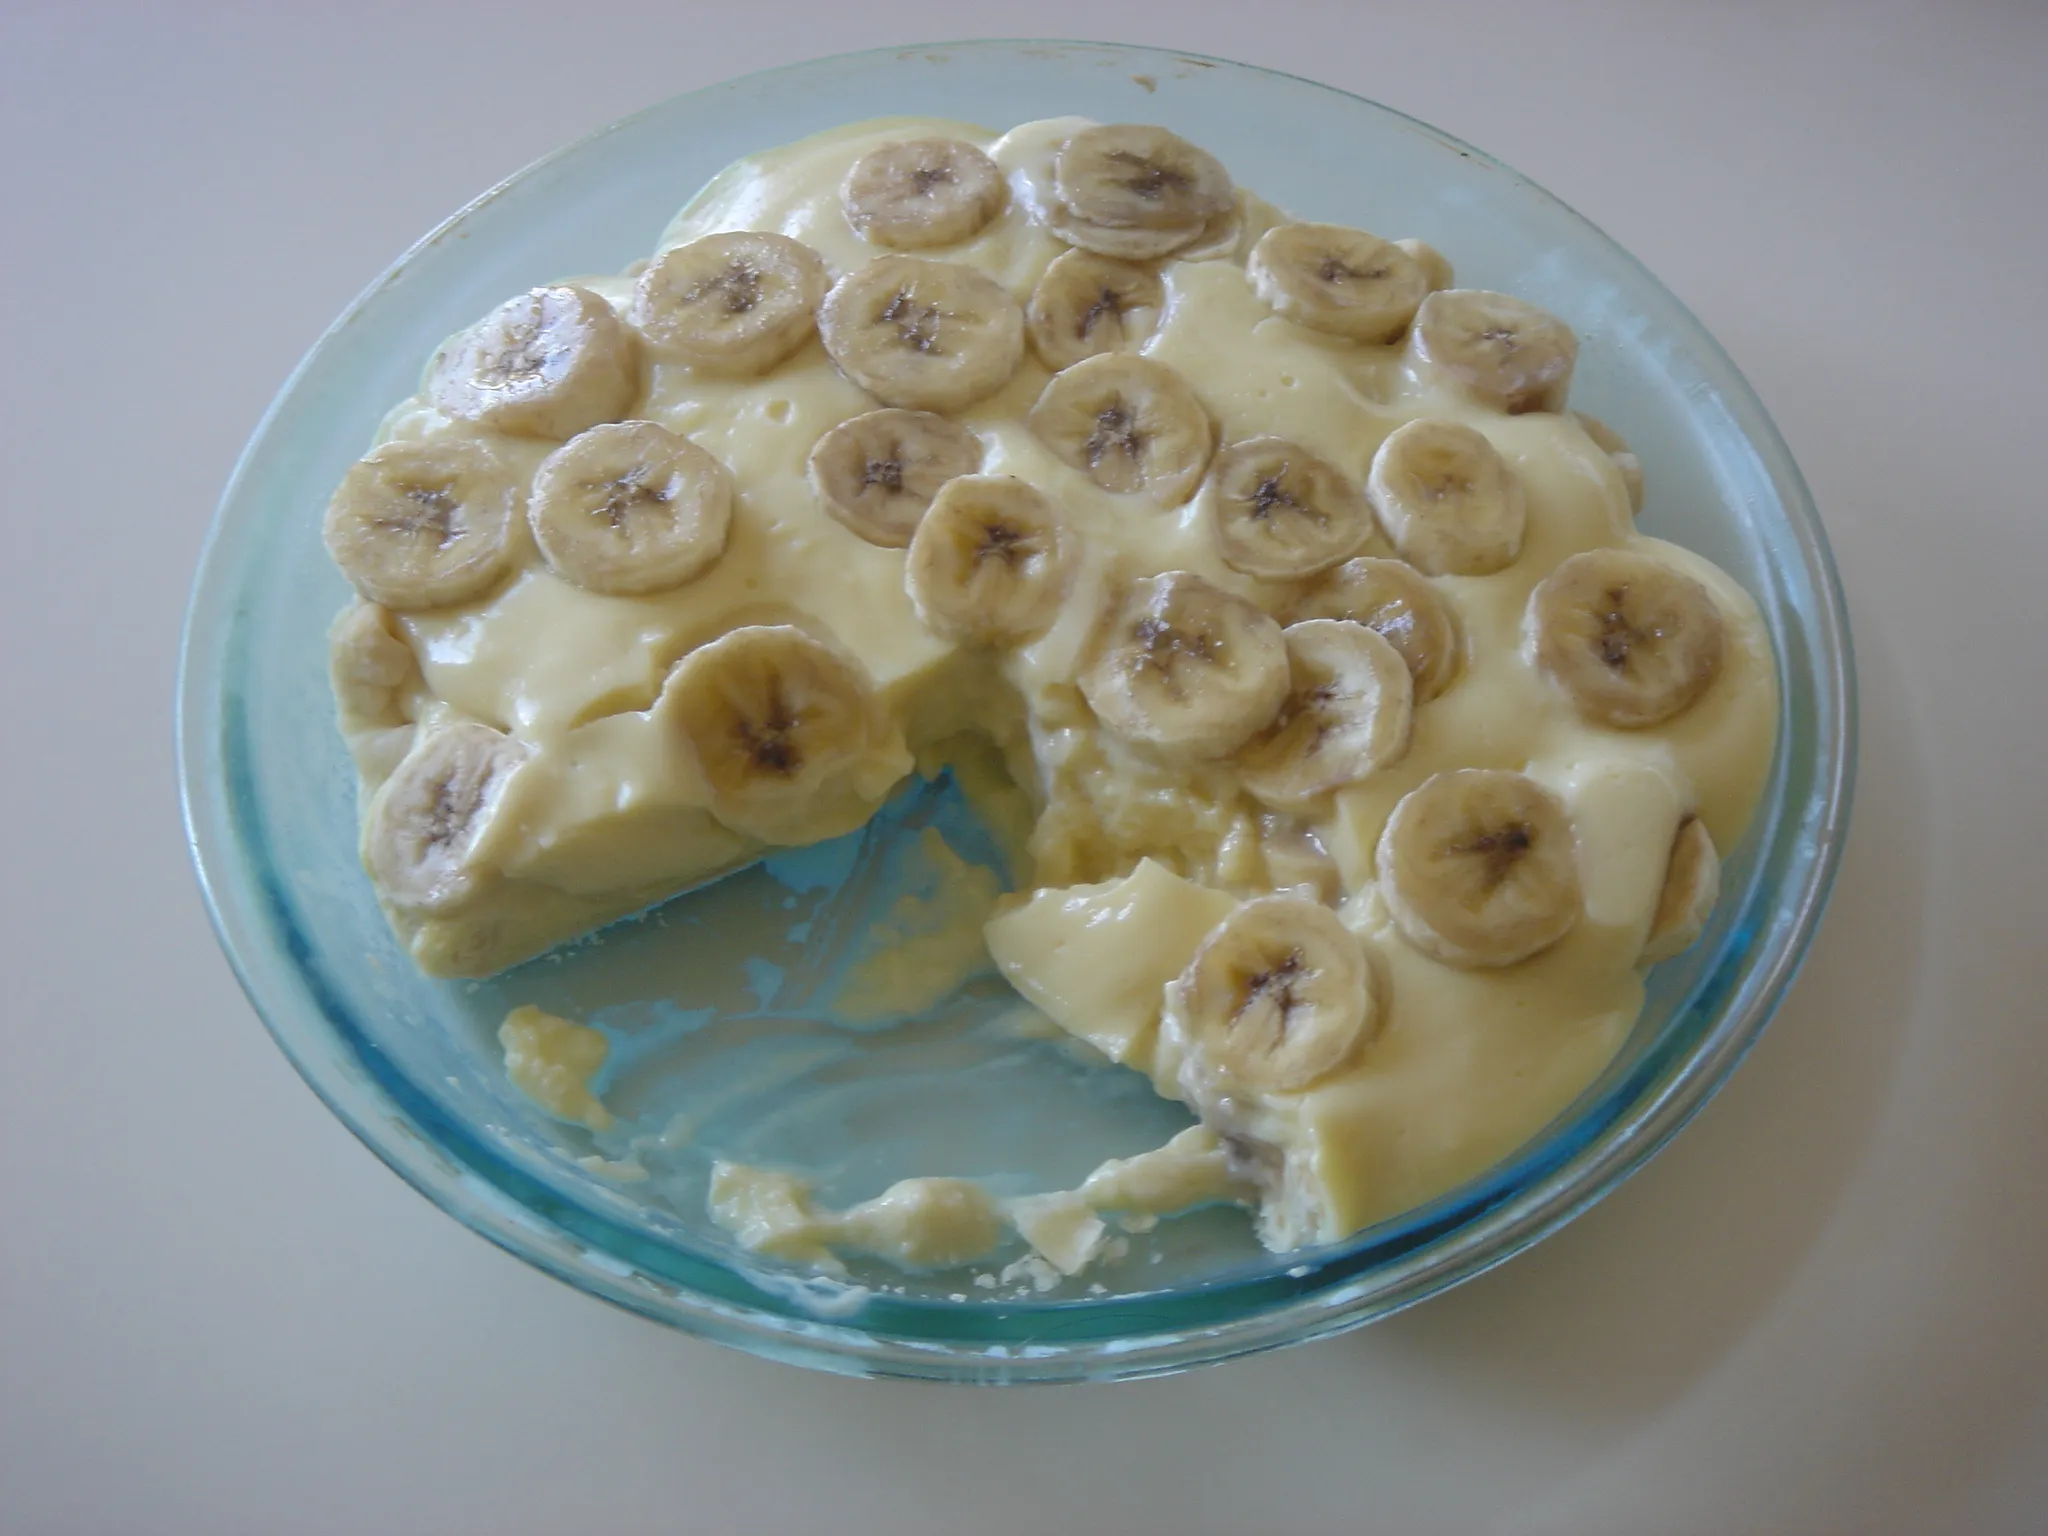 How to Make a Delicious Banana Cream Pie with Pudding